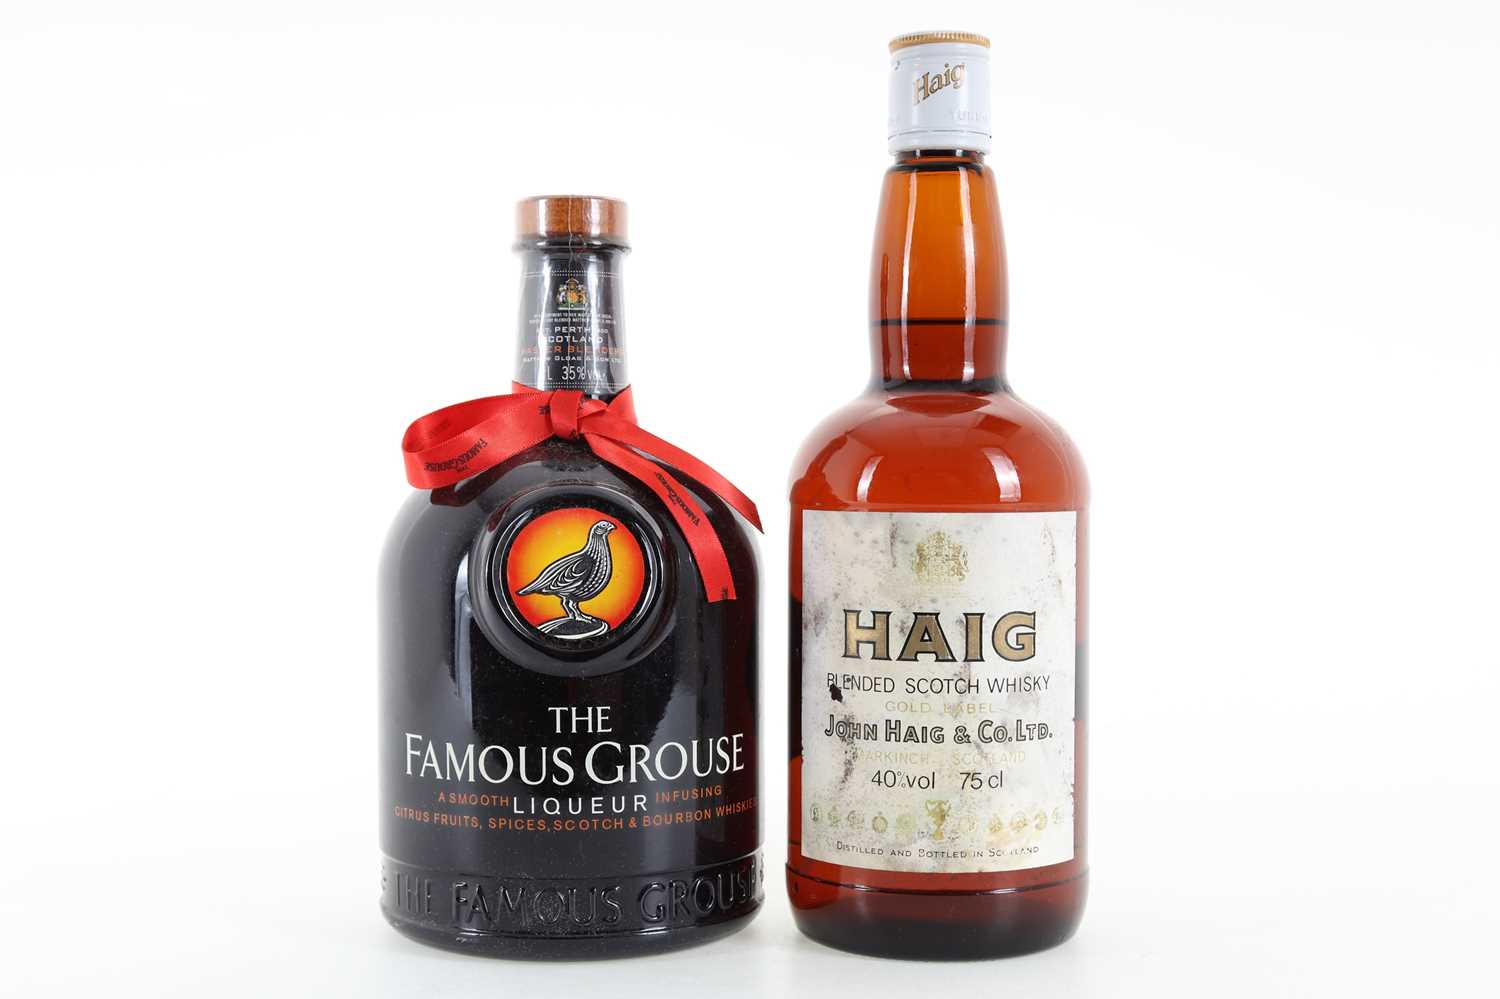 FAMOUR GROUSE LIQUEUR 1L AND HAIG GOLD LABEL 75CL BLENDED WHISKY AND LIQUEUR